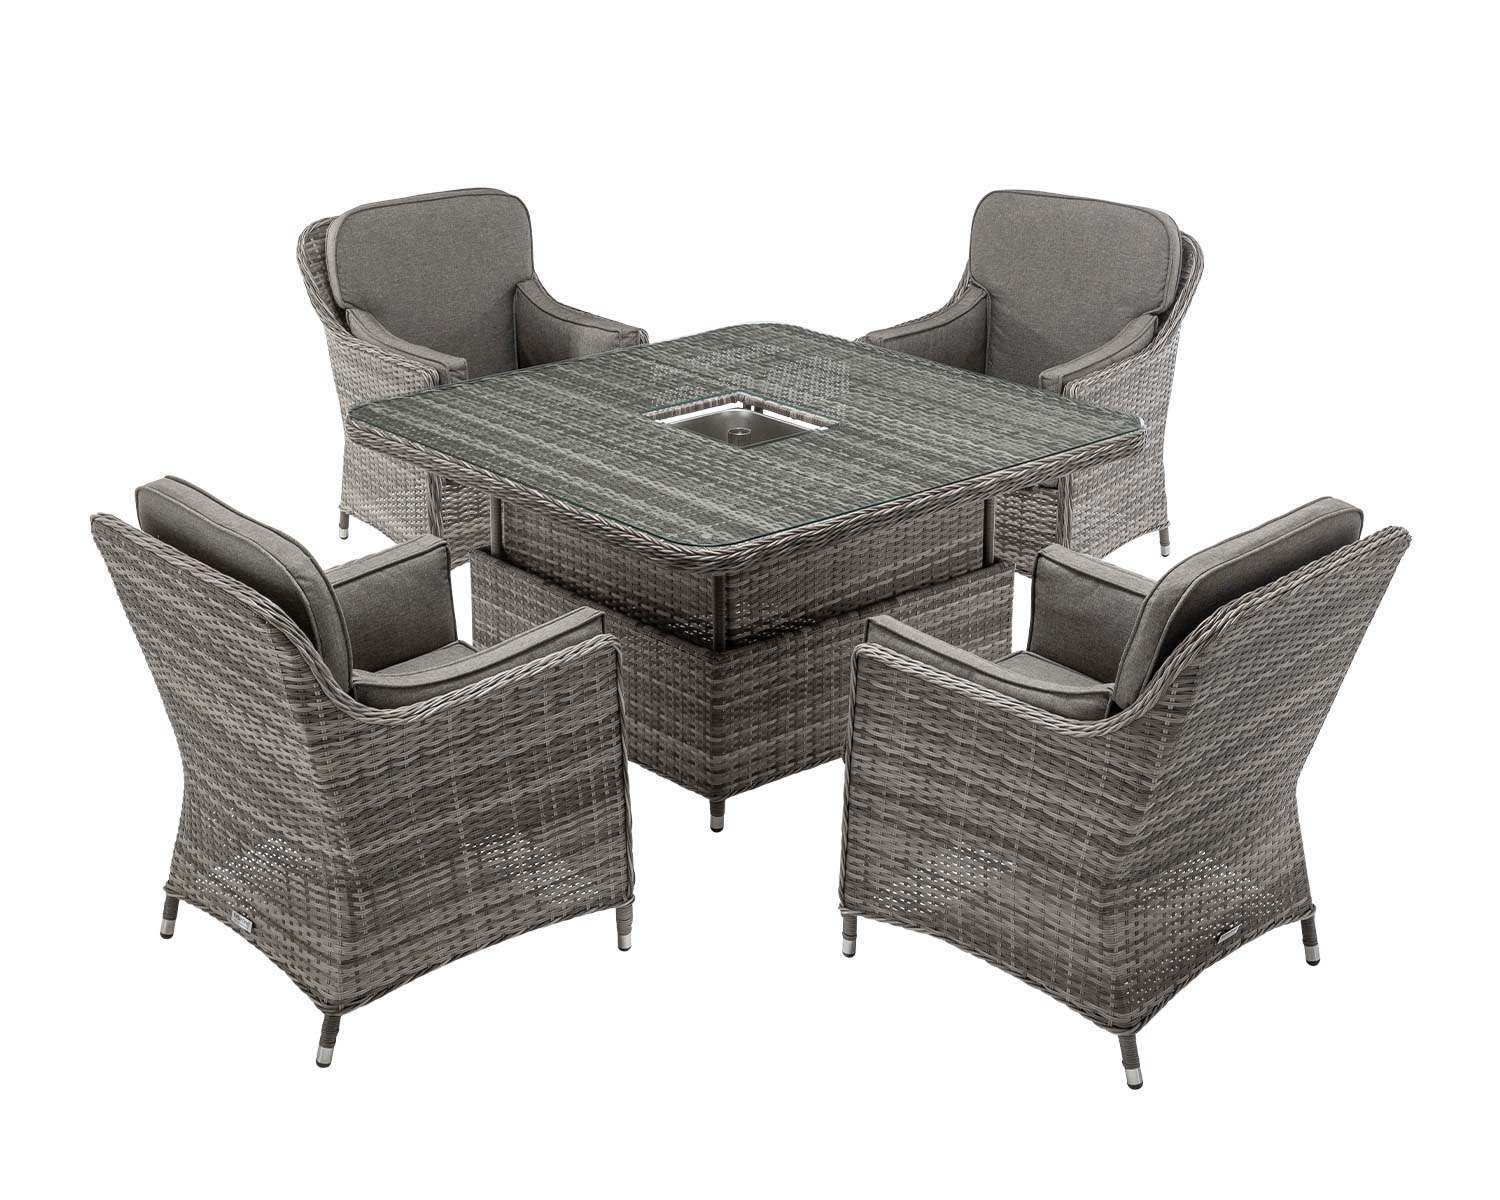 4 Seat Rattan Garden Dining Set With Square Table In Grey With Ice Bucket Lyon Rattan Direct